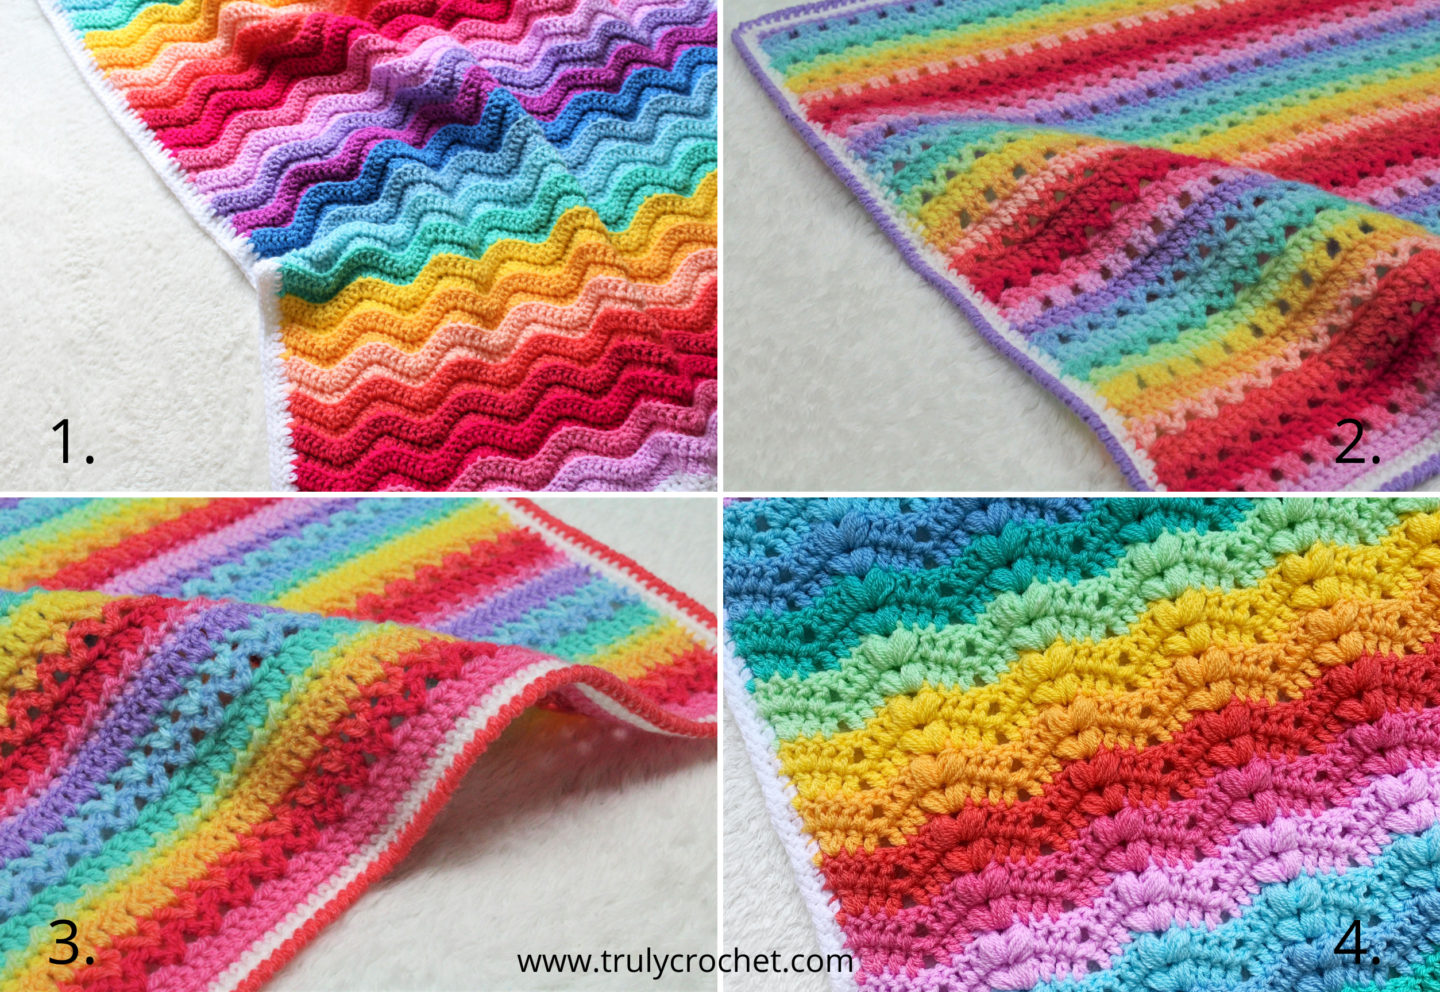 Other Free Crochet Patterns